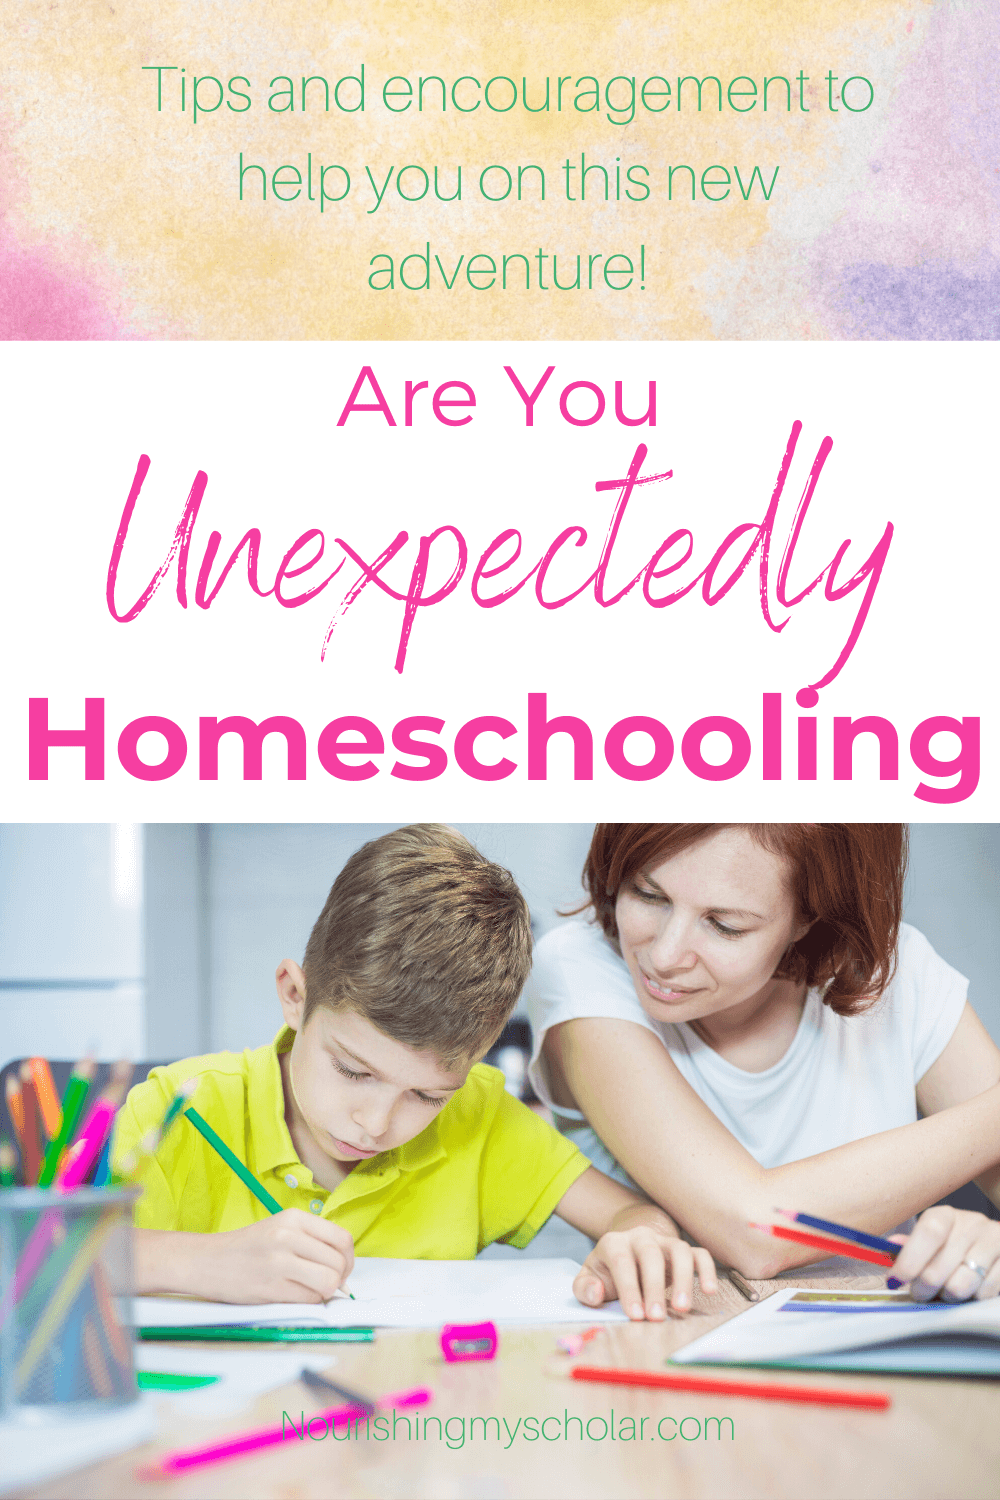 Are You Unexpectedly Homeschooling: Parents all over the internet are suddenly finding themselves unexpectedly homeschooling! Read on for my best tips! #homeschool #homeschooling #unexpectedlyhomeschooling 